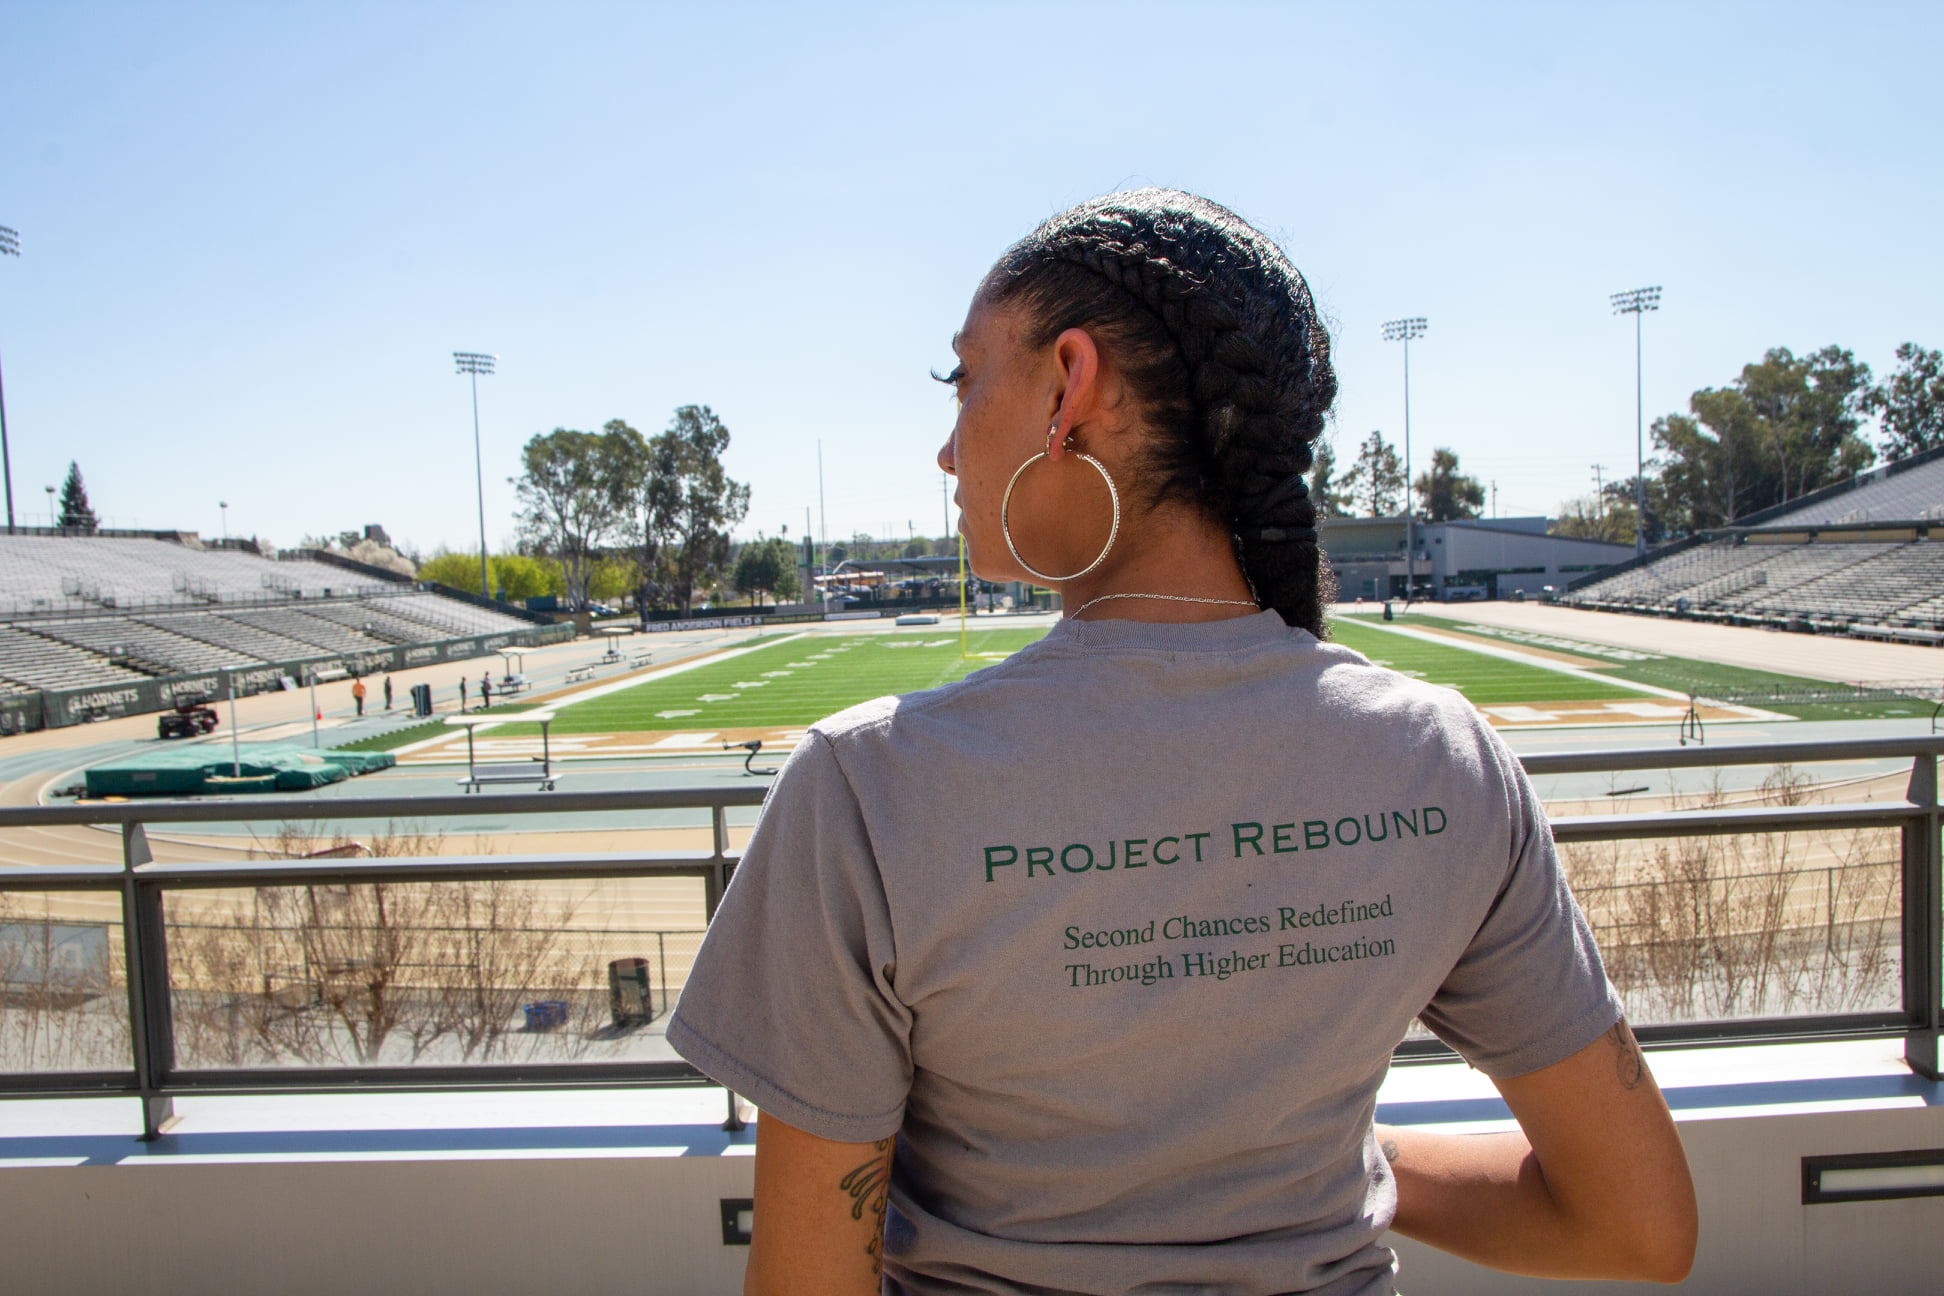 A woman in a t-shirt reading "Project Rebound" stands facing Hornet Stadium